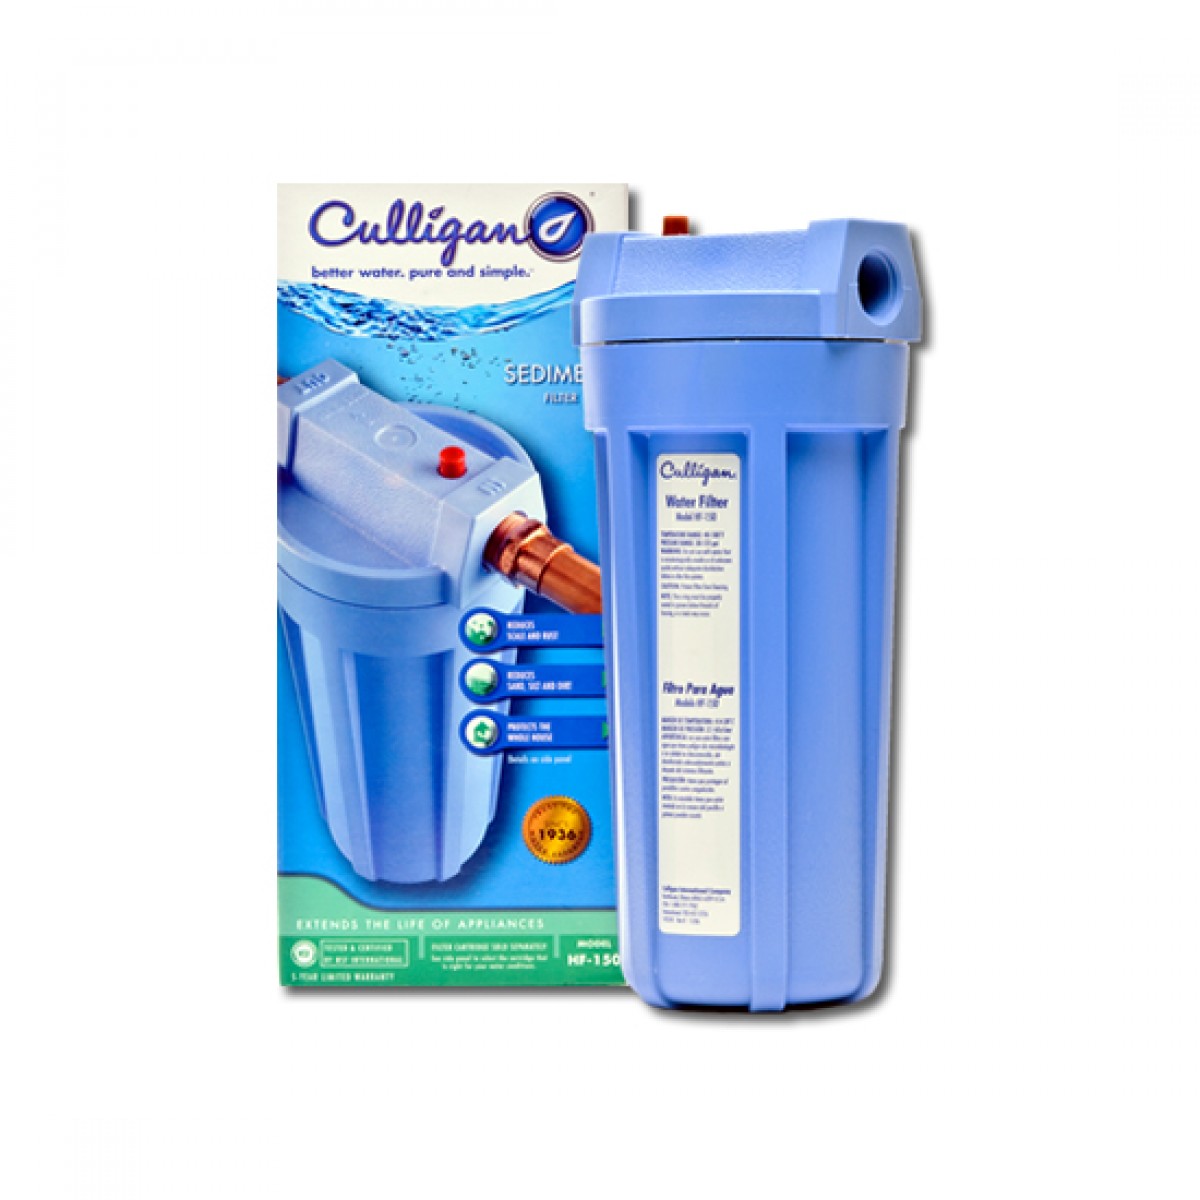 Culligan WH1 whole house filter